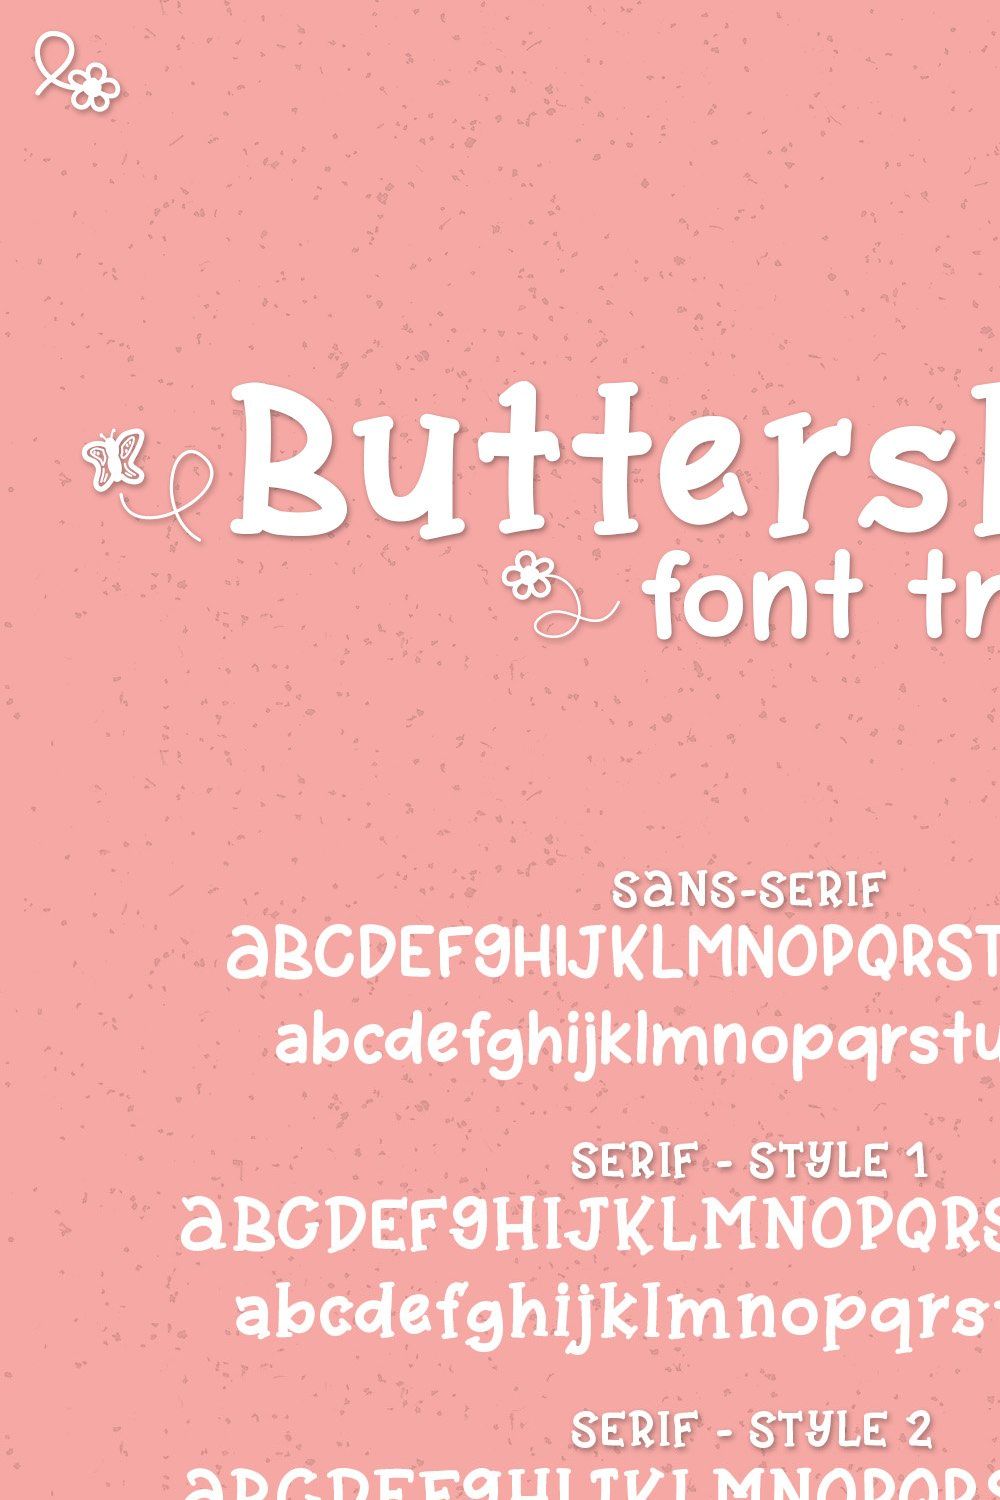 Buttersky pinterest preview image.